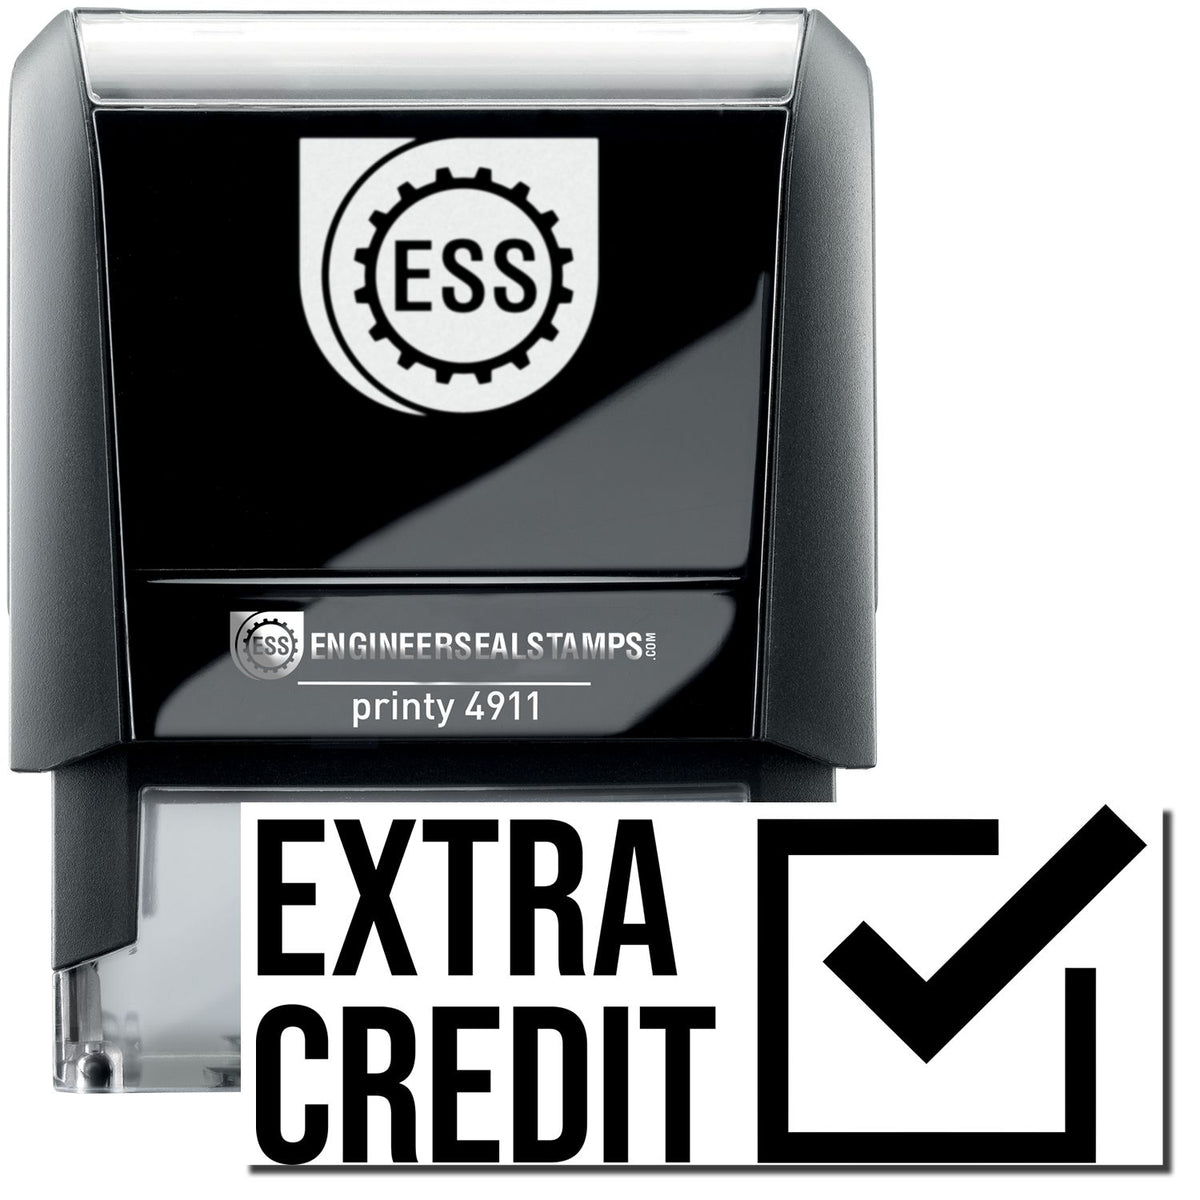 A self-inking stamp with a stamped image showing how the text &quot;EXTRA CREDIT&quot; (in bold font with a checked box on the right side) is displayed after stamping.